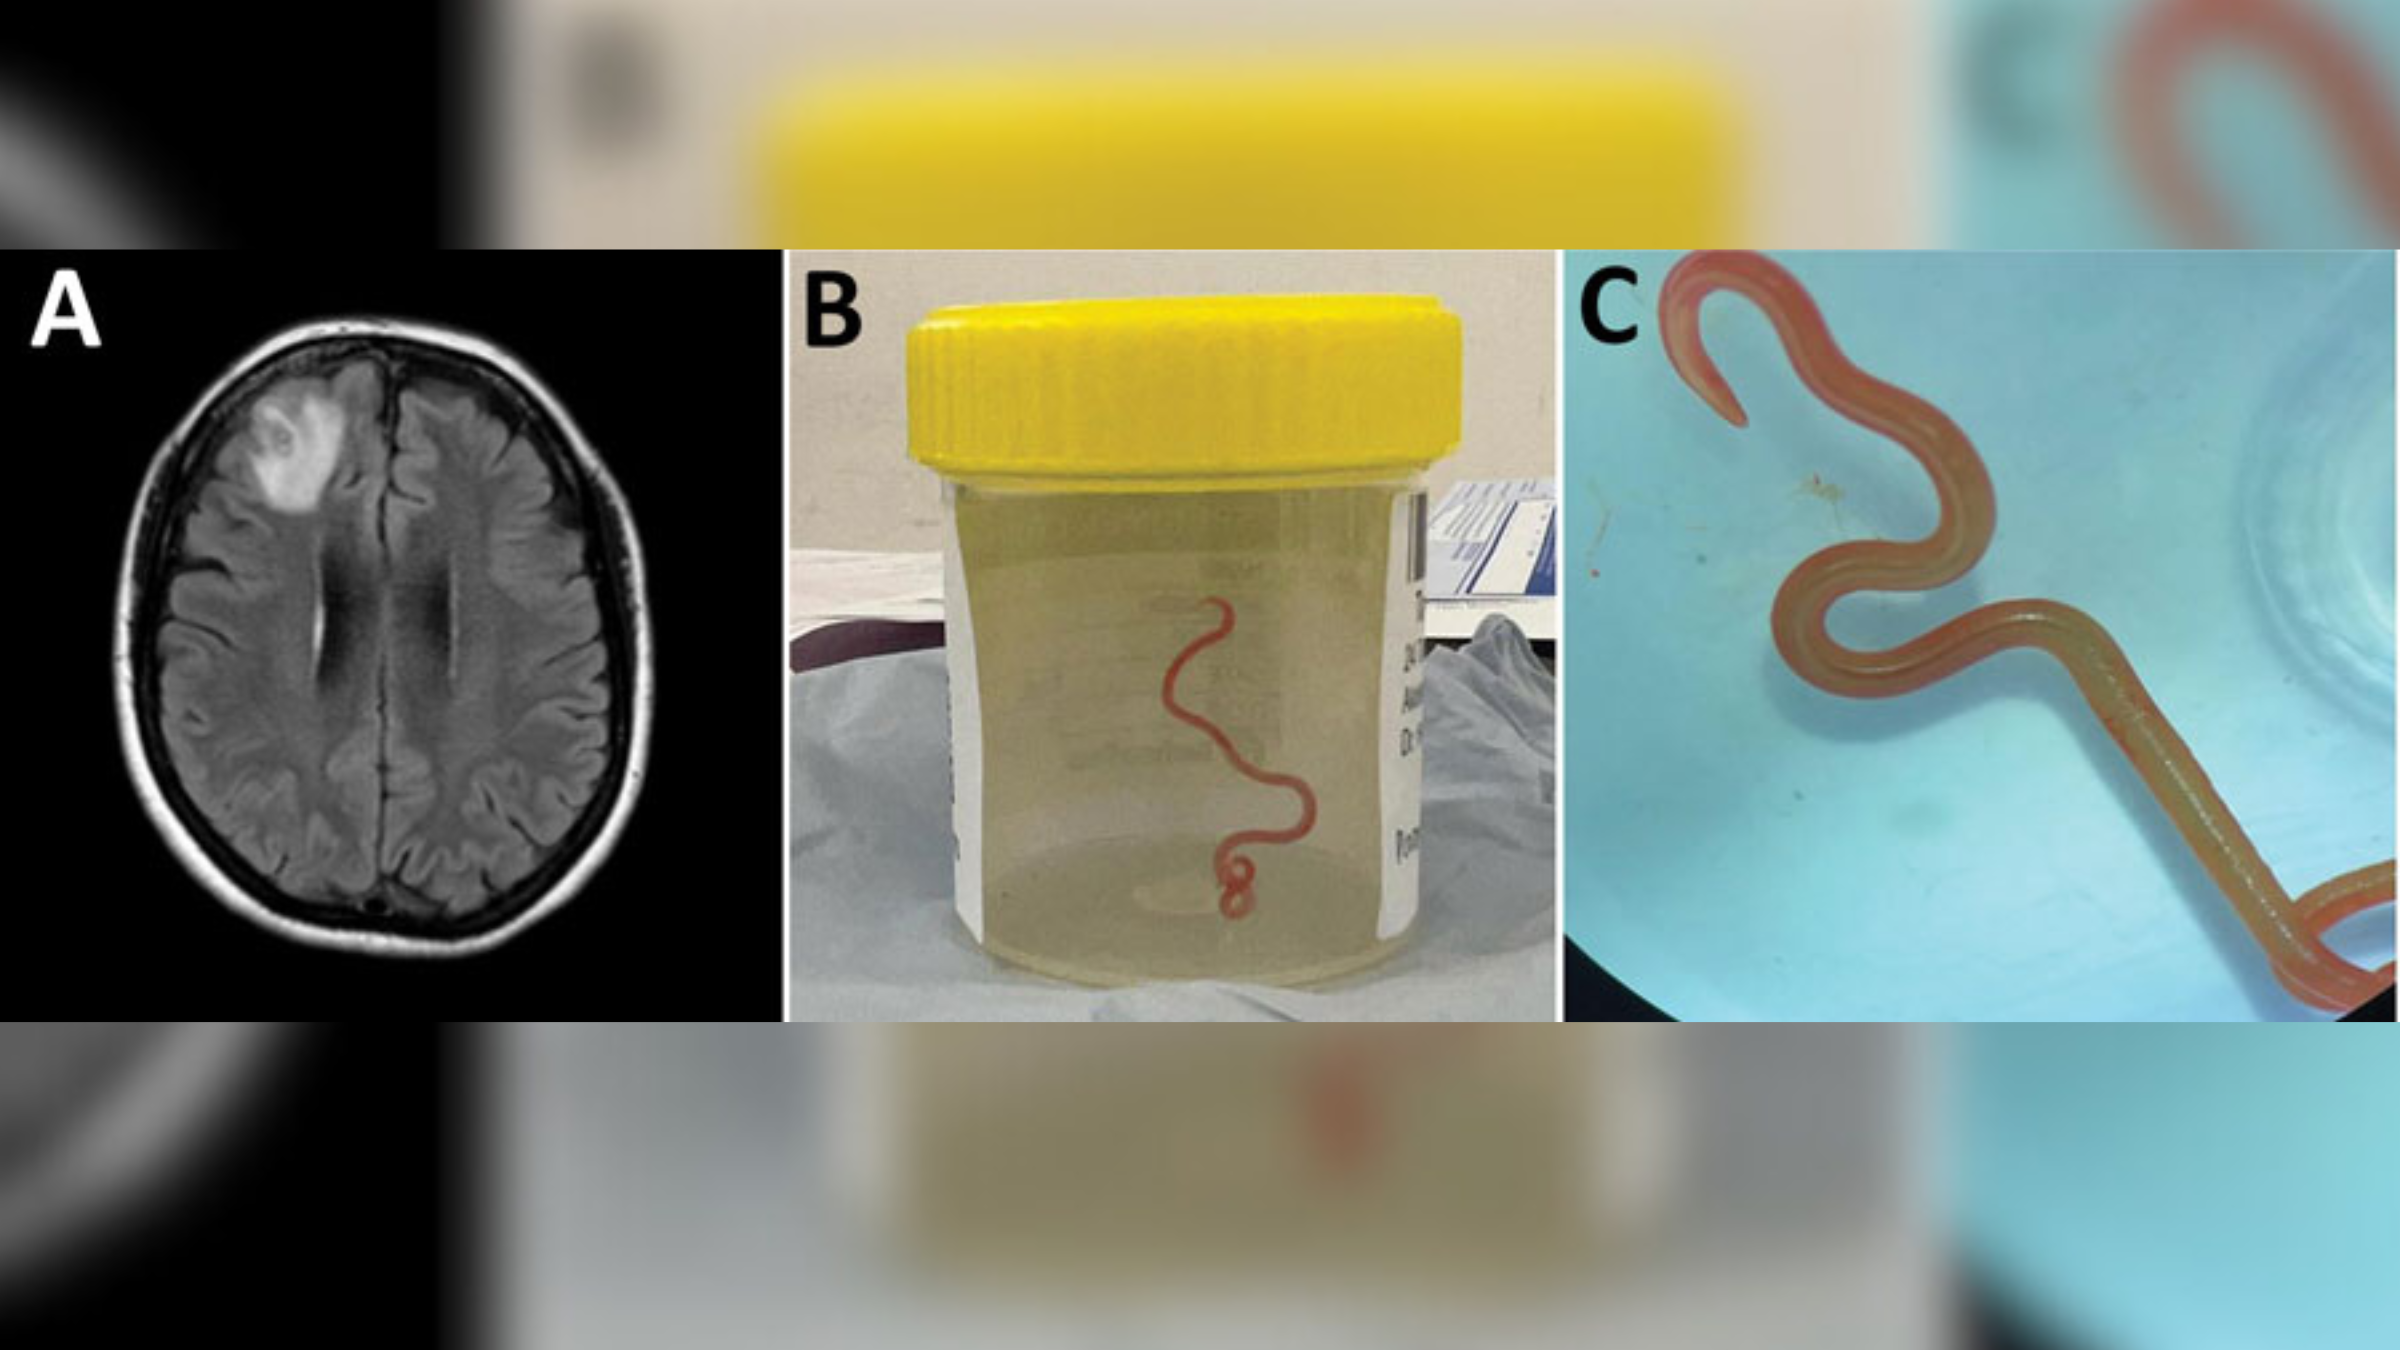 Australia Woman S Brain Invaded By Parasitic Worm That Normally Infects